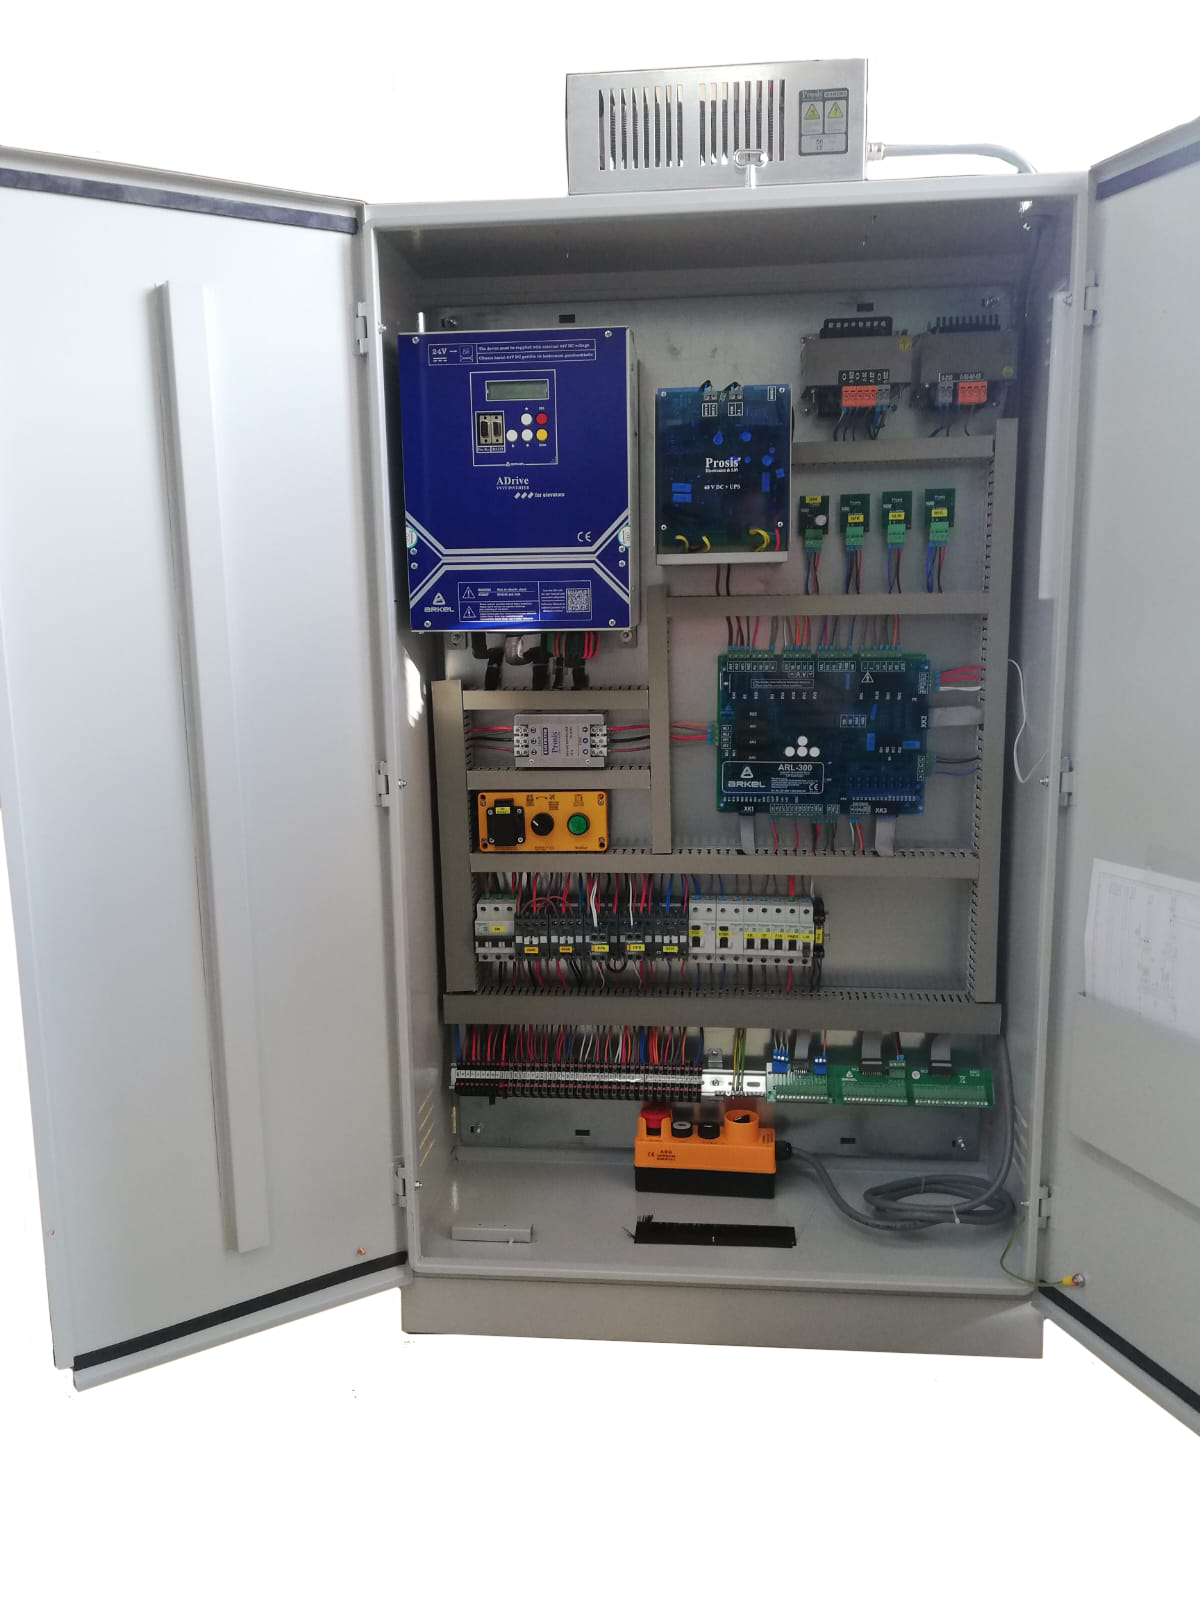 11 kW ADRIVE + ARL300 GEARED-ASYNCHRONOUS-MR-A3-BATTERY RESCUE CONTROL PANEL